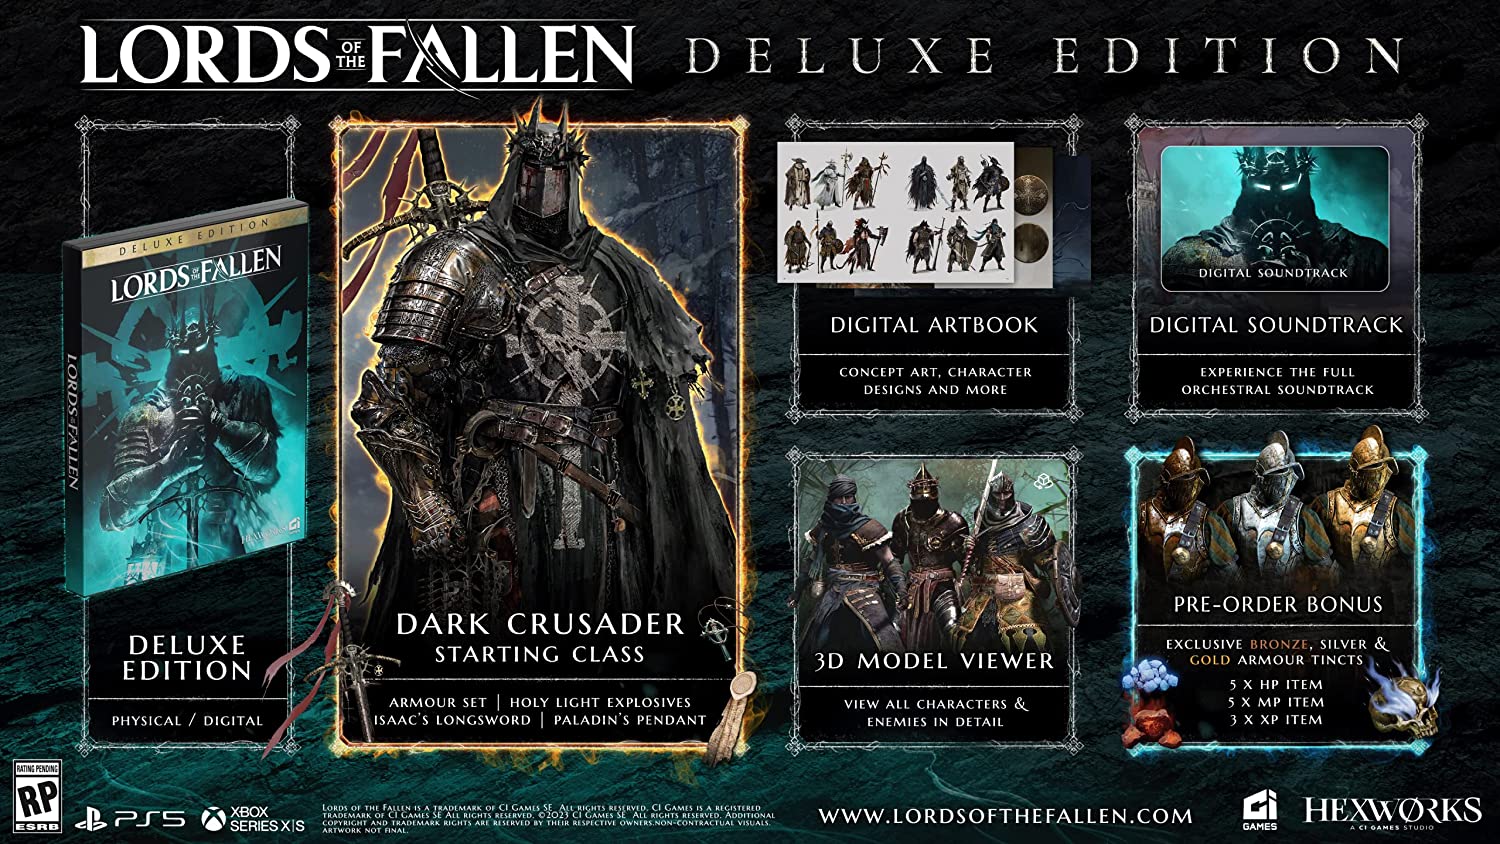 Lords of the Fallen Deluxe Edition includes